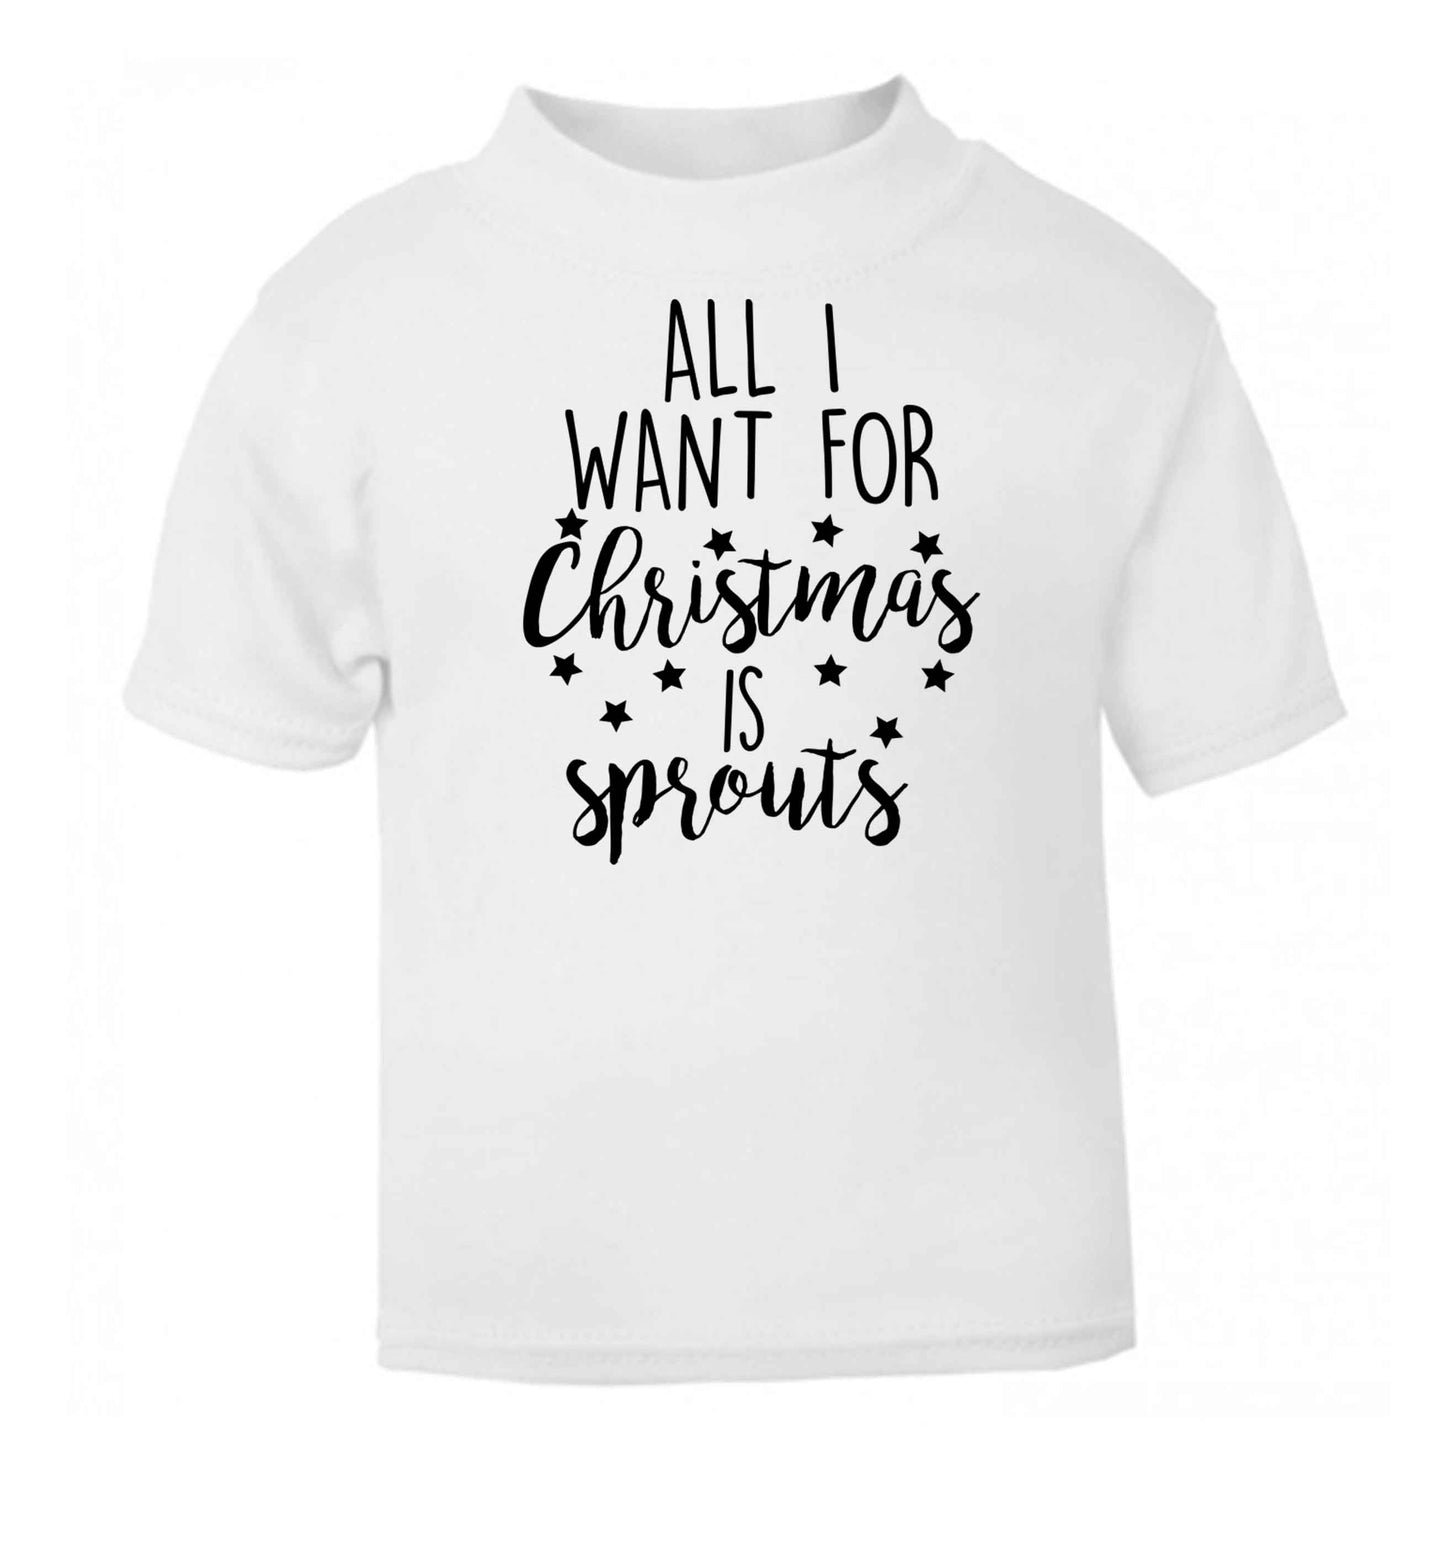 All I want for Christmas is sprouts white baby toddler Tshirt 2 Years